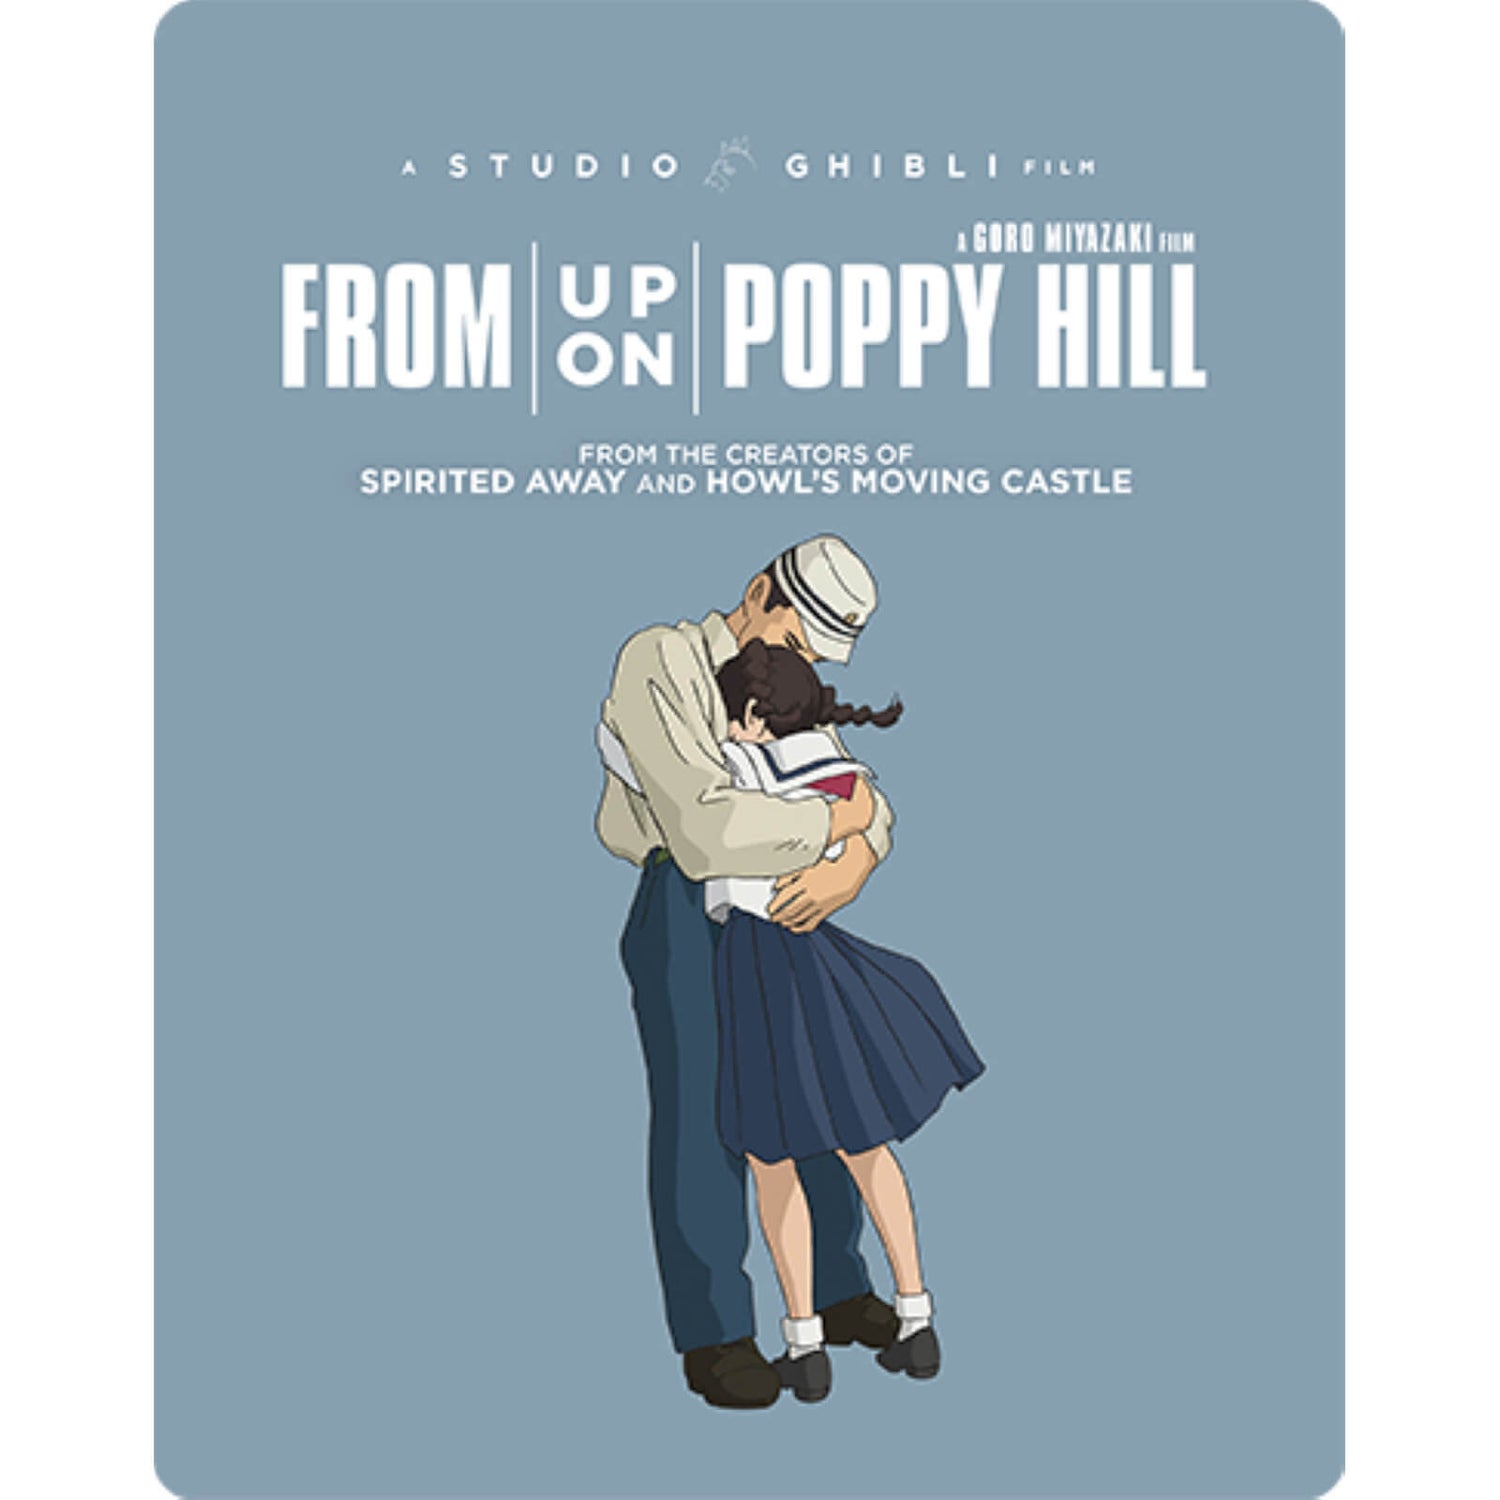 From Up on Poppy Hill - Steelbook (Includes DVD)